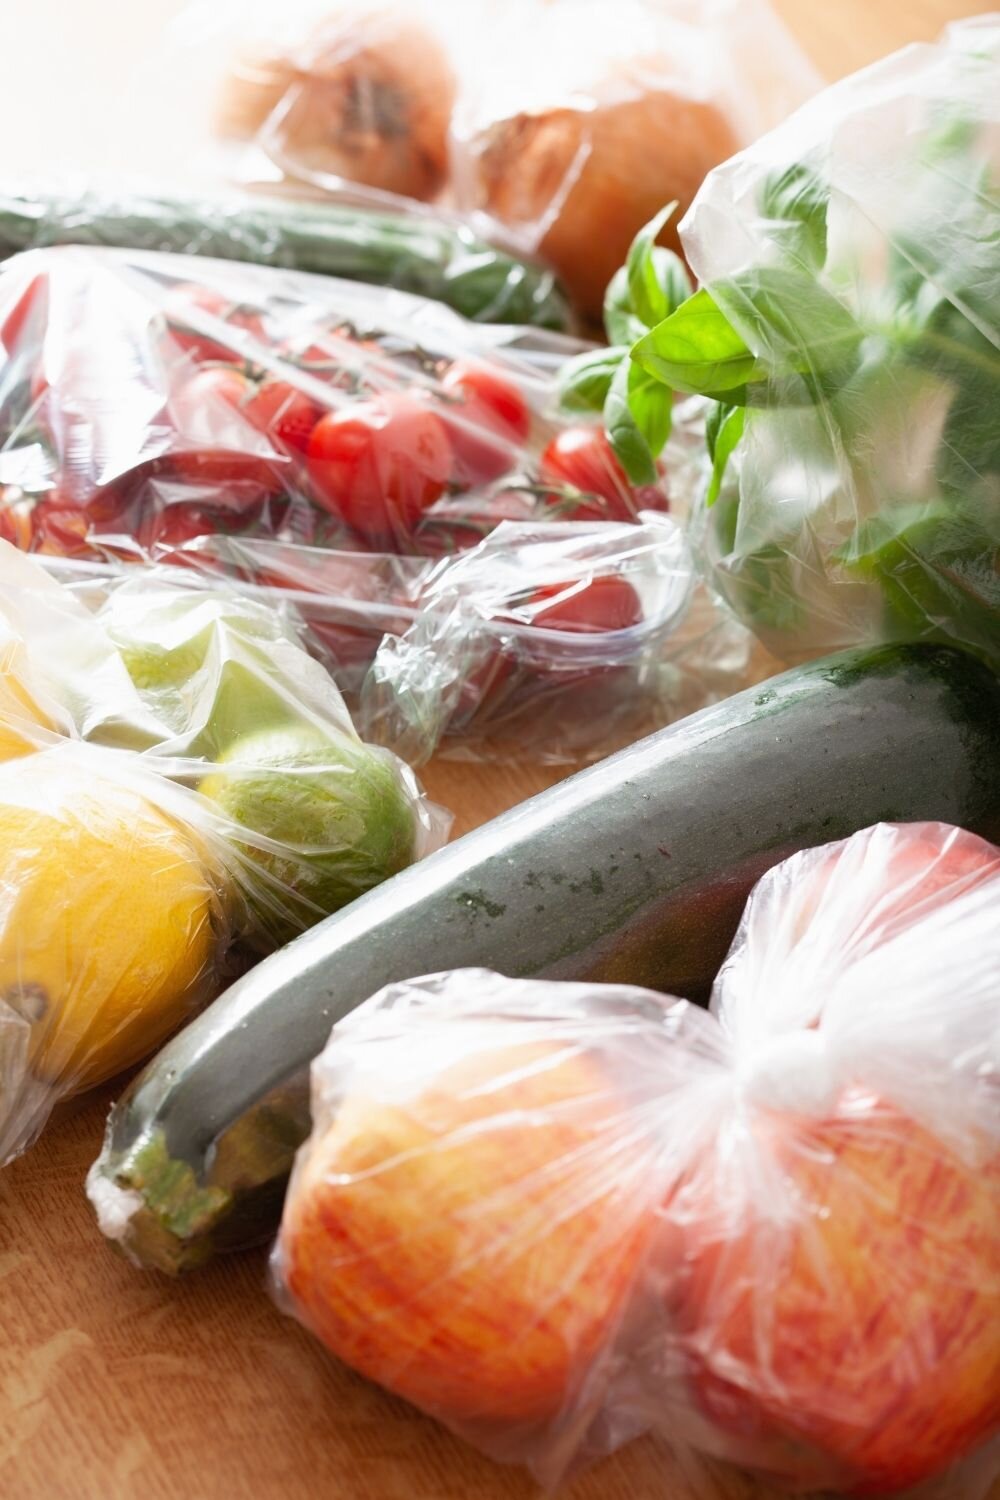 How to Cut Back on Plastic in Your Food and Home